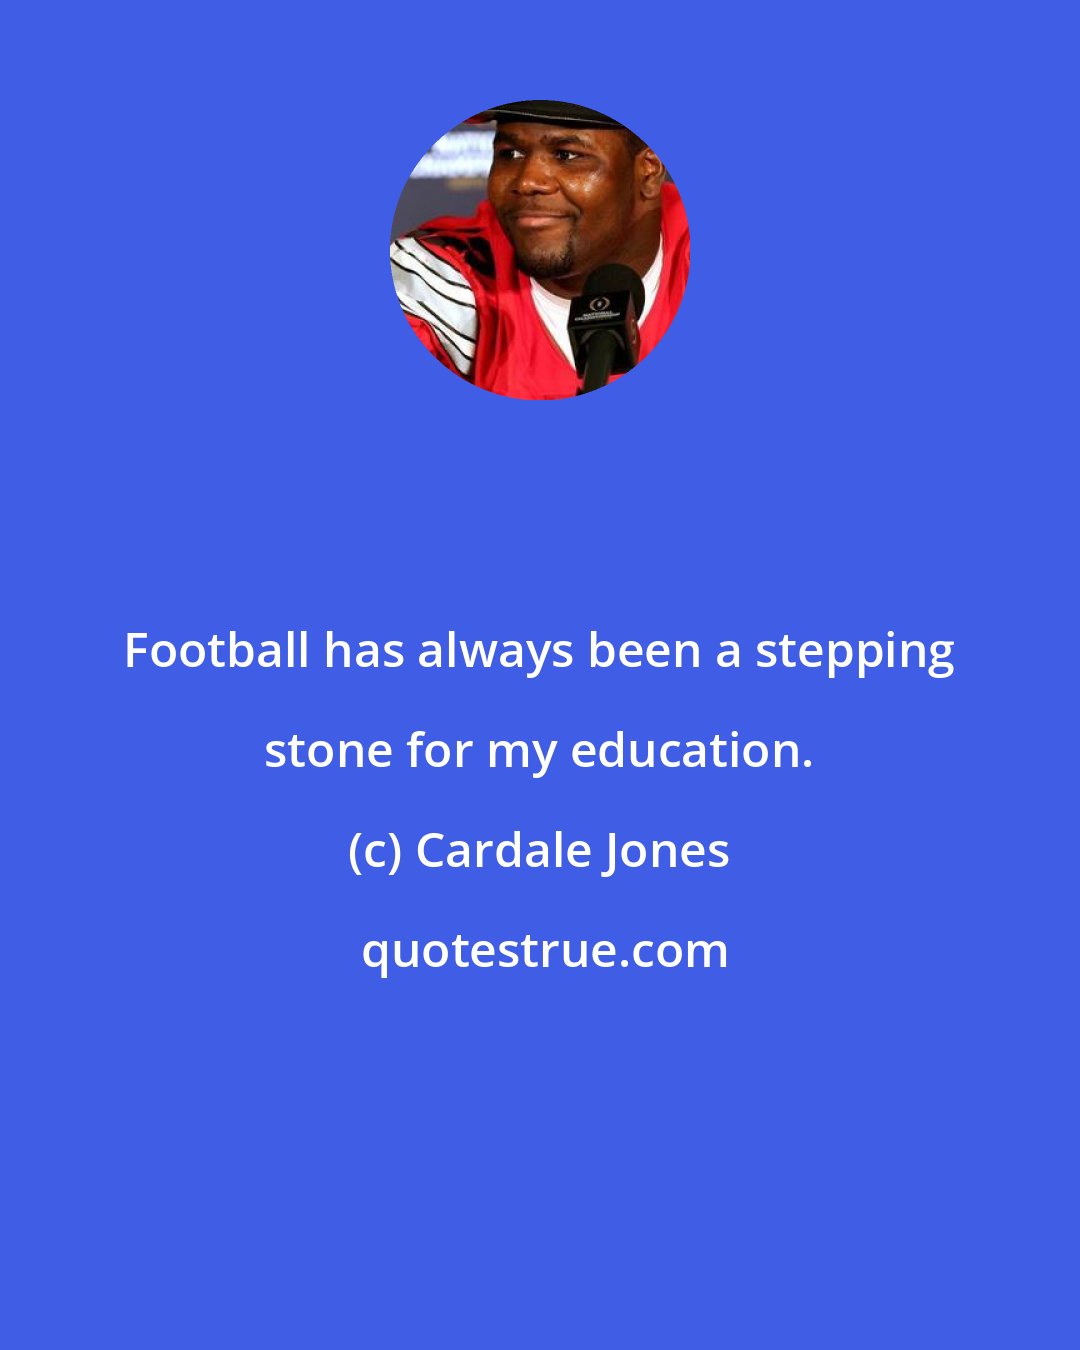 Cardale Jones: Football has always been a stepping stone for my education.